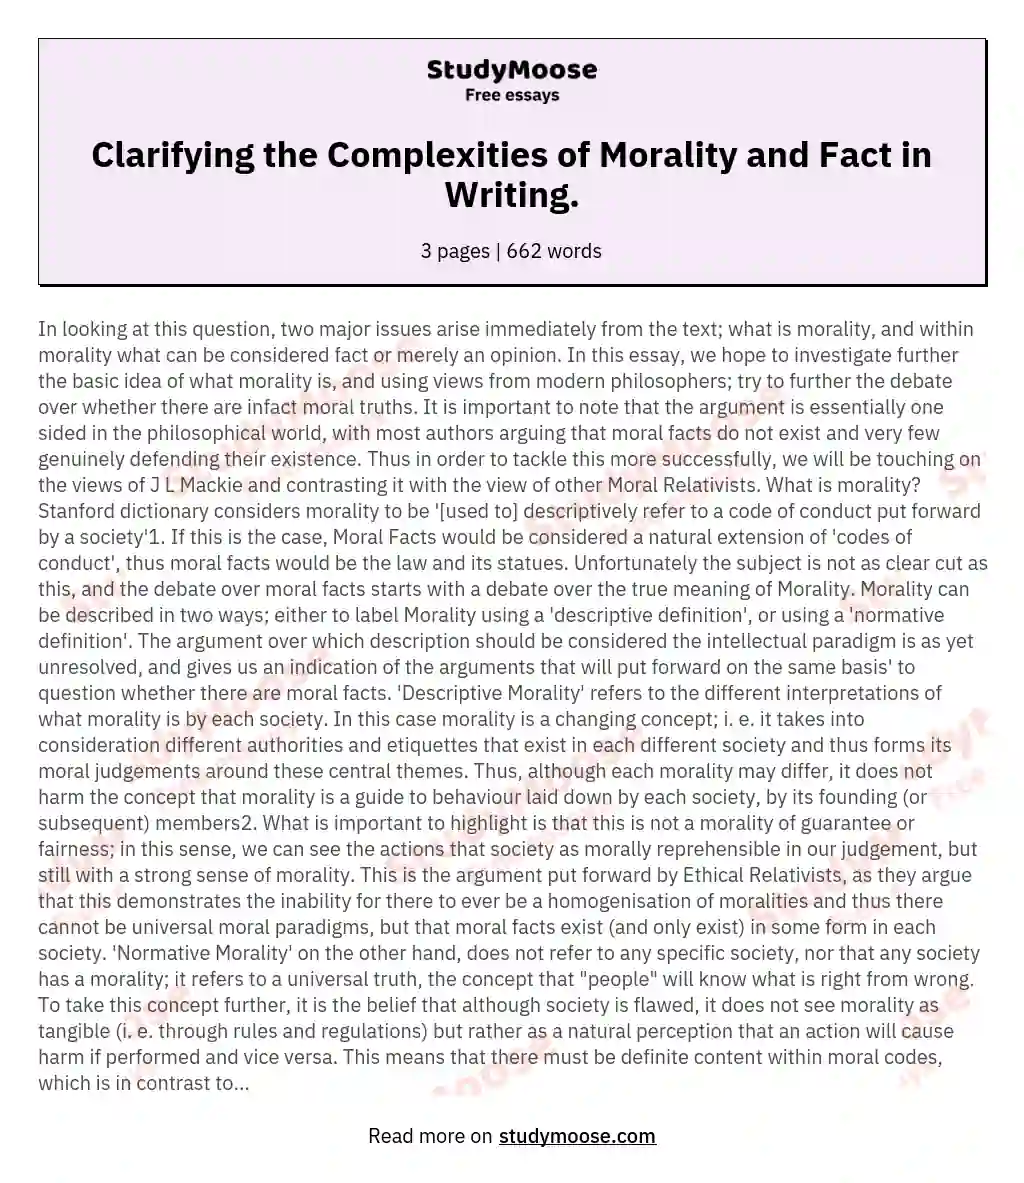 Clarifying the Complexities of Morality and Fact in Writing. essay